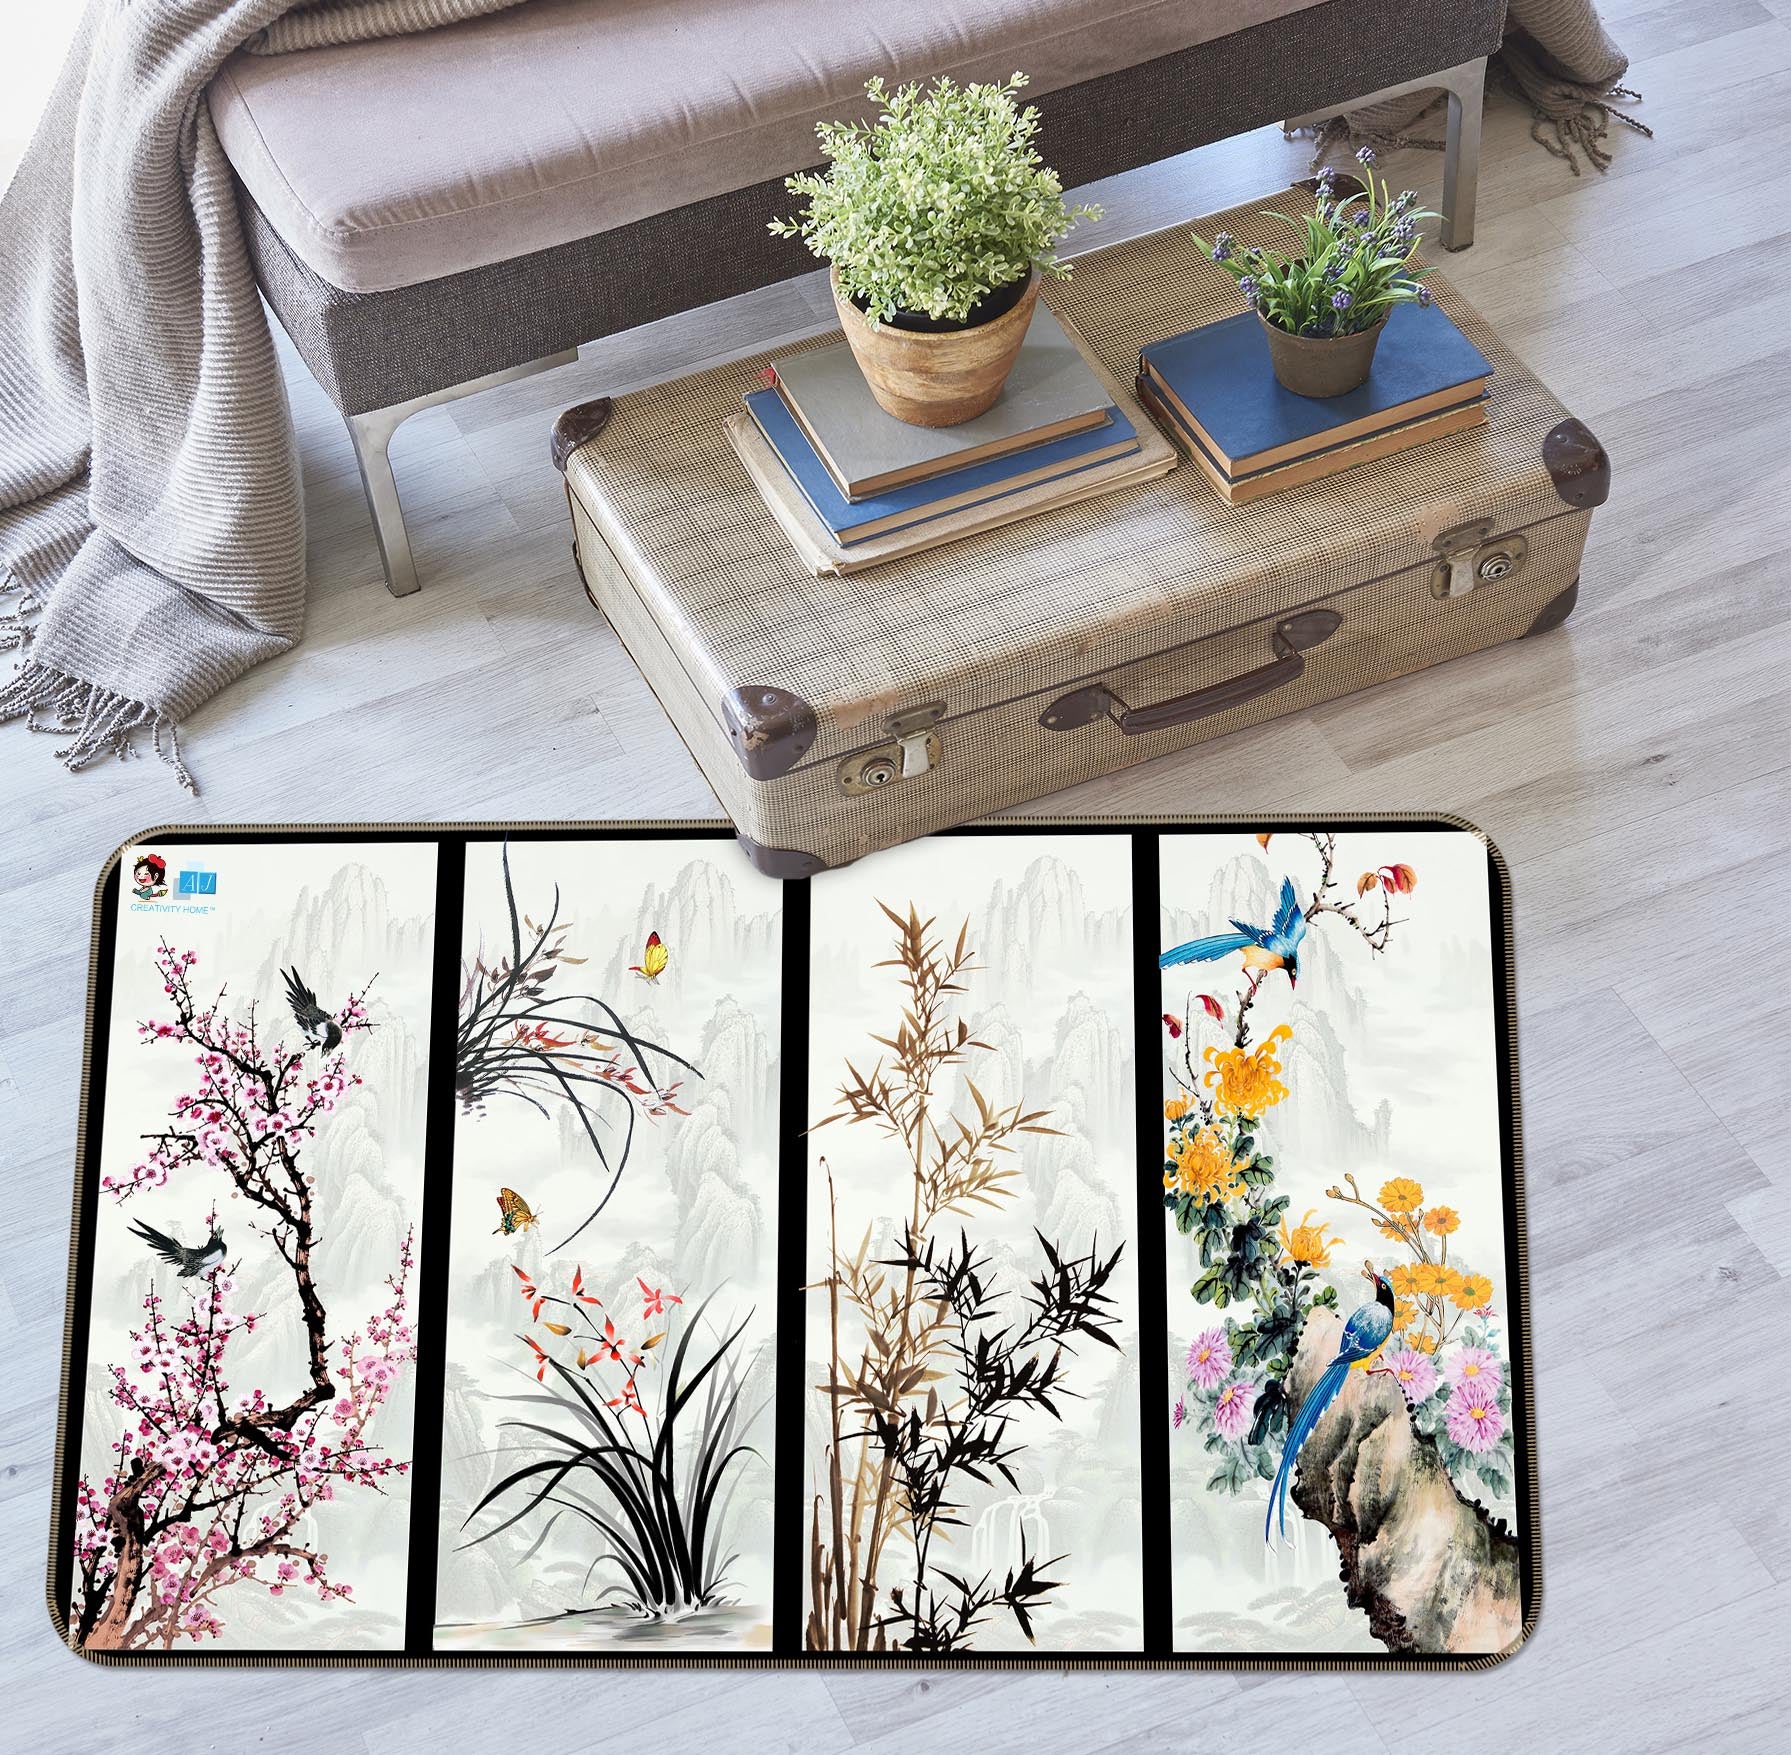 3D Chinese Style 3067 Rug Non Slip Rug Mat